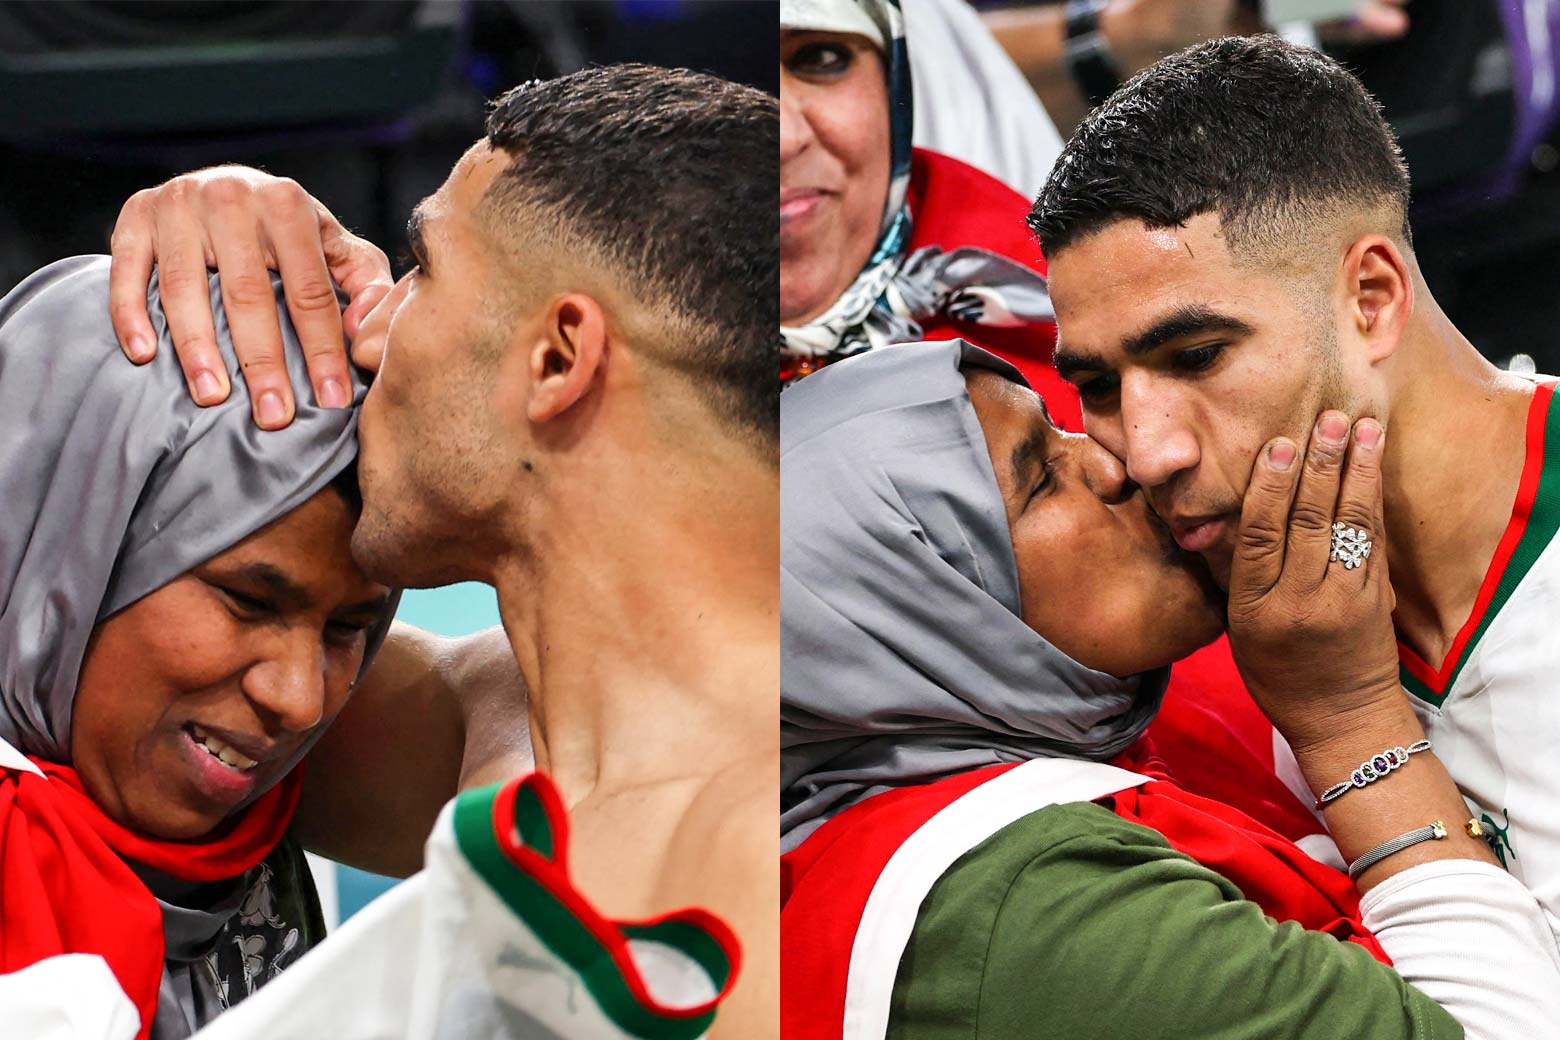 A collage of two images, from L-R: Achraf Hakimi kisses his mother's forehead and cups her head with his hand. Achraf Hakimi's mother holds his face and kisses his cheek.